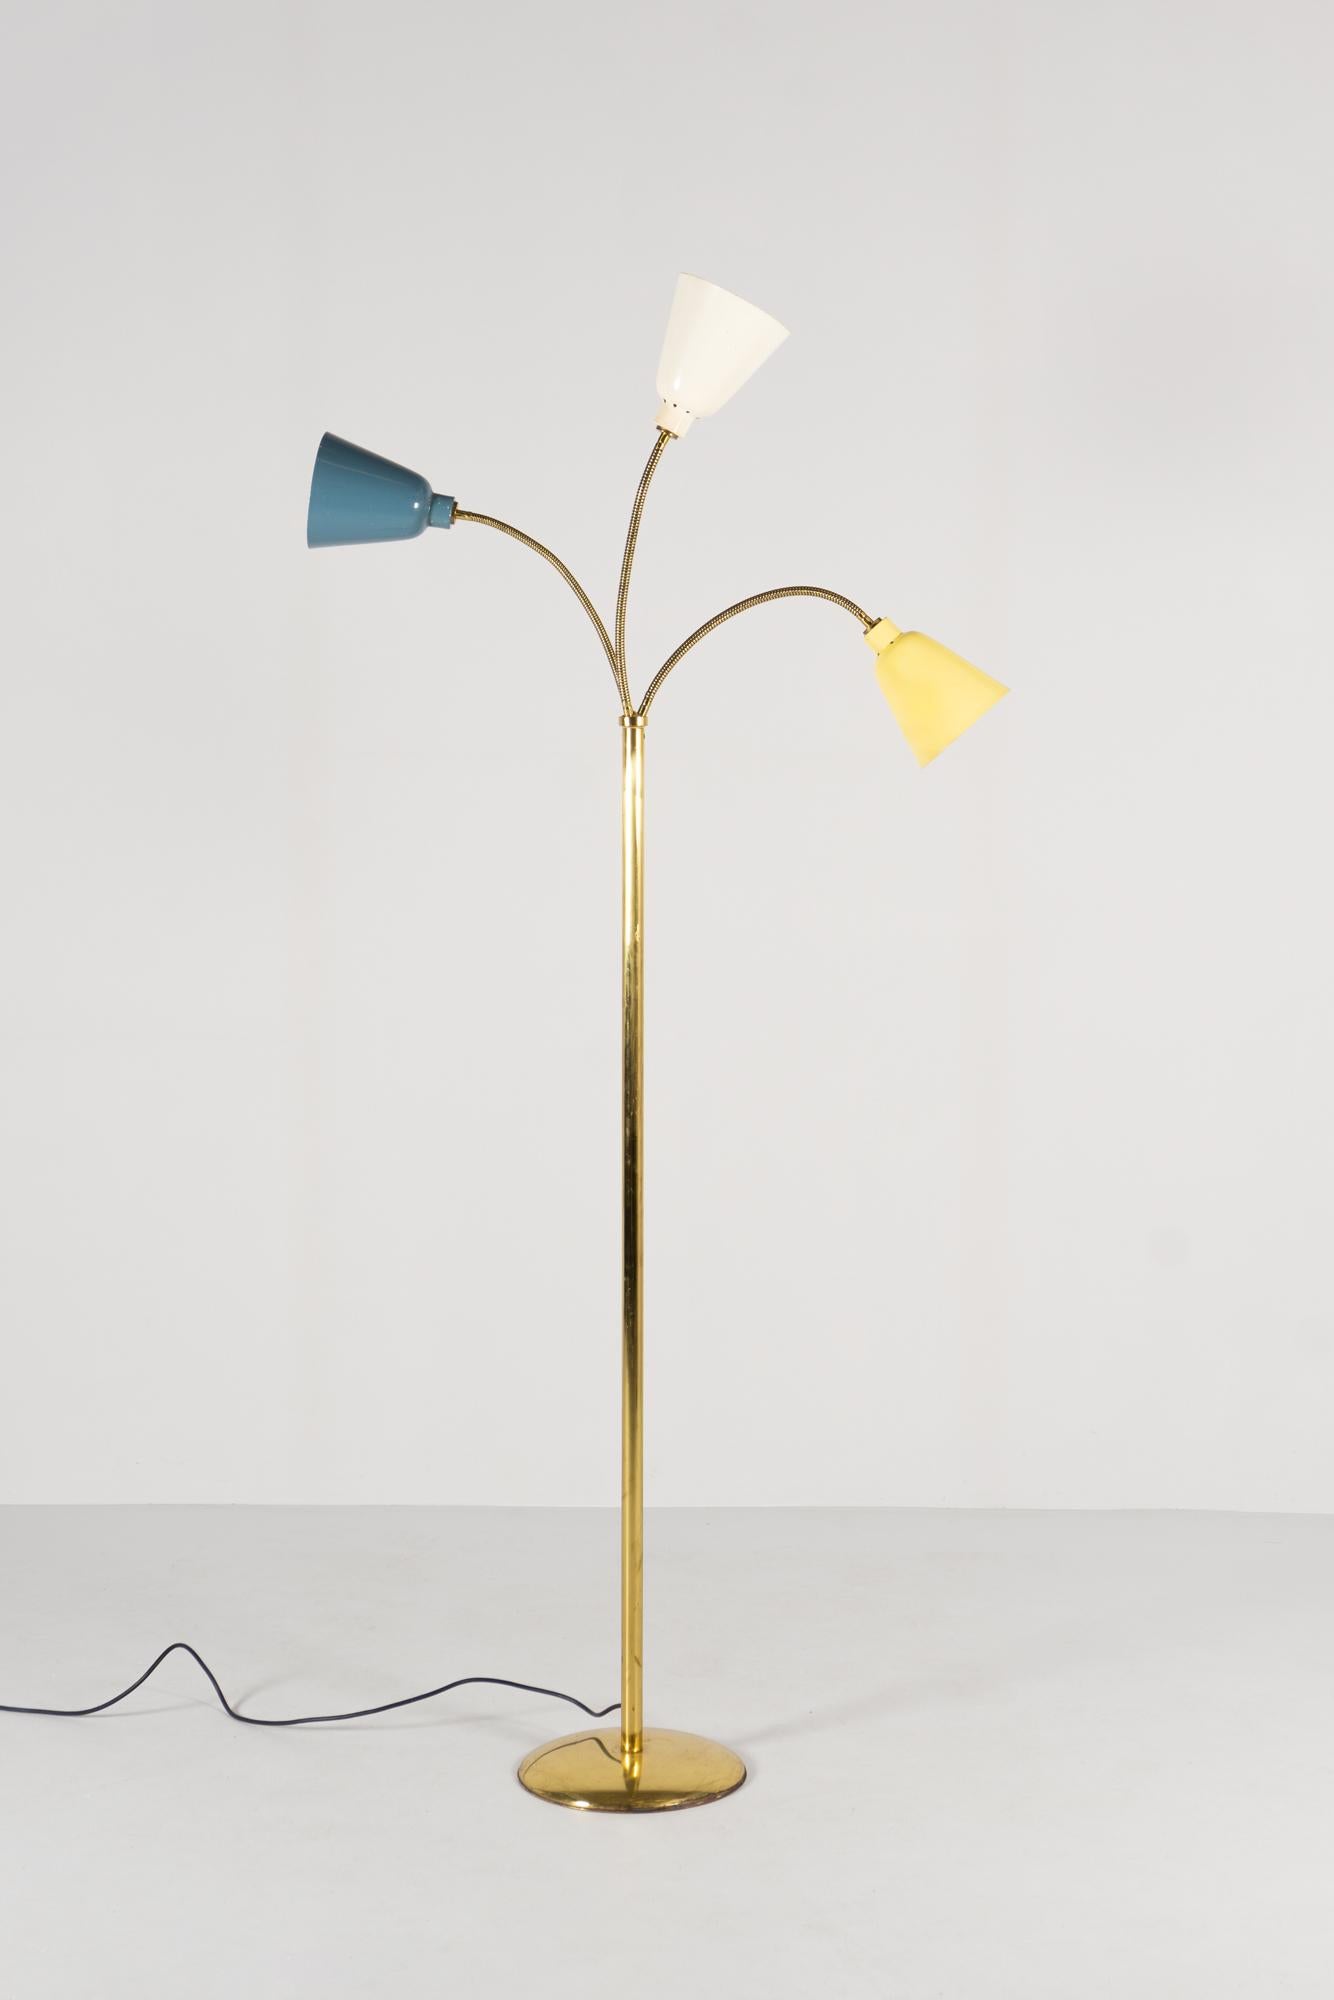 Floor lamp
Brass base and rod, with three reflectors, original paintwork
In petrol, cream white and pale yellow, flexible arms in brass
Dimensions / H.200cm
Design / Guiseppe Ostuni, 1950
Manufacturer / O-Luce Italy

